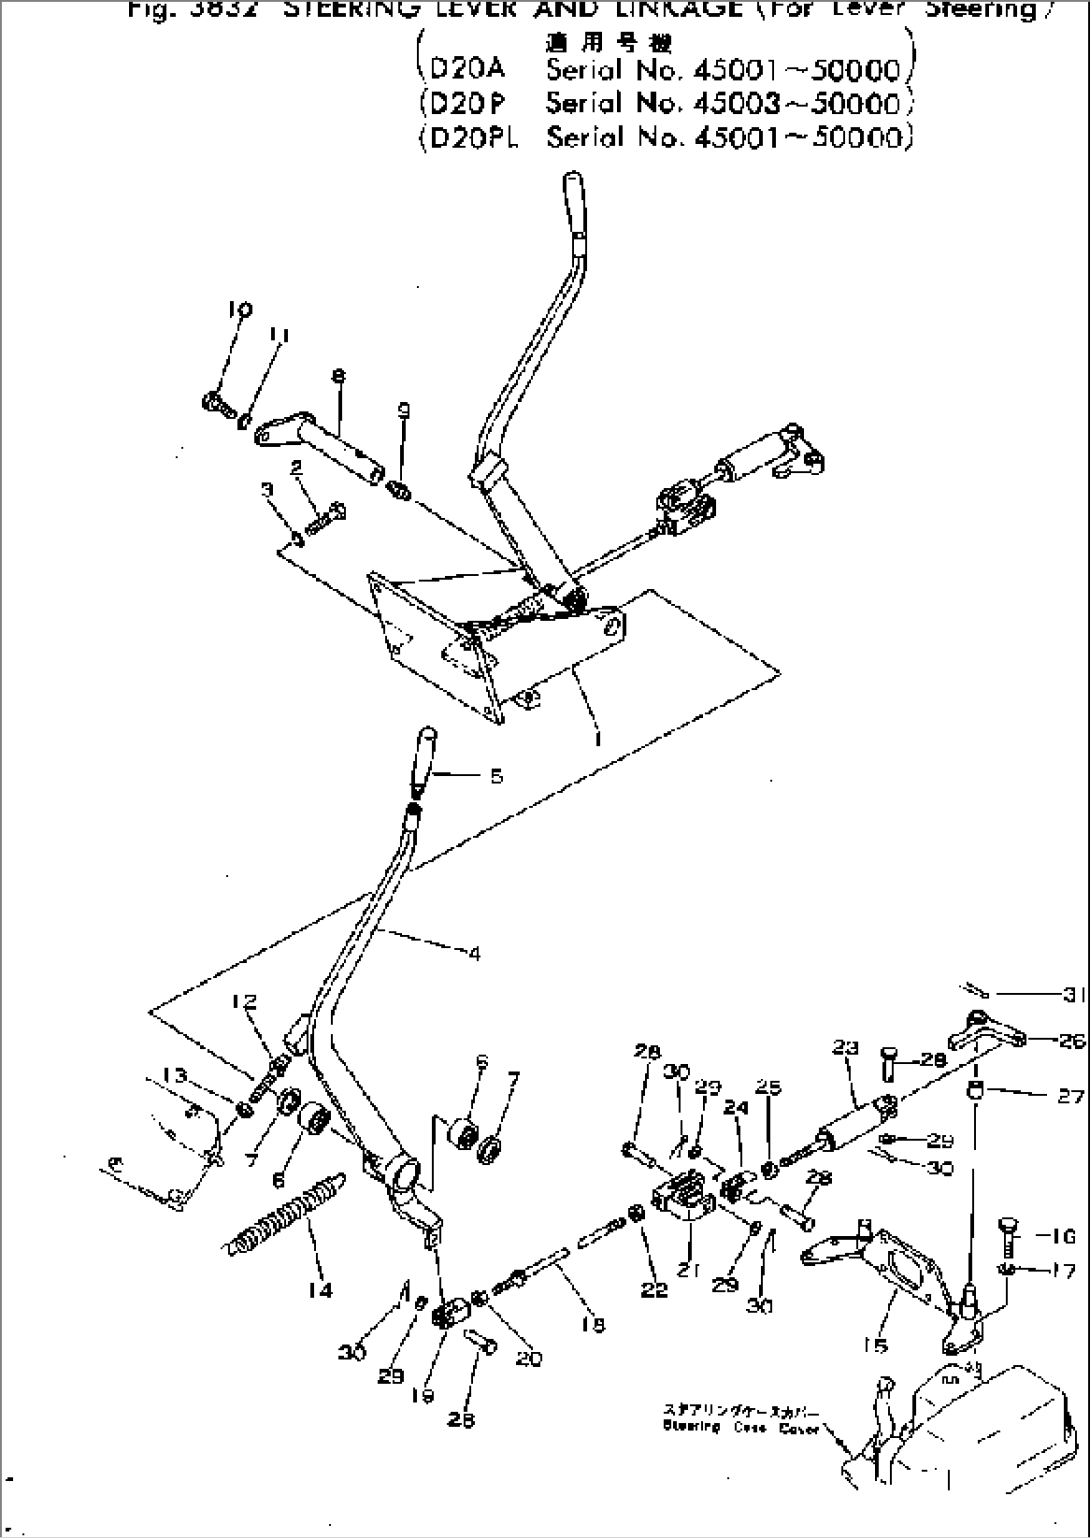 STEERING LEVER AND LINKAGE (FOR LEVER STEERING)(#45001-50000)